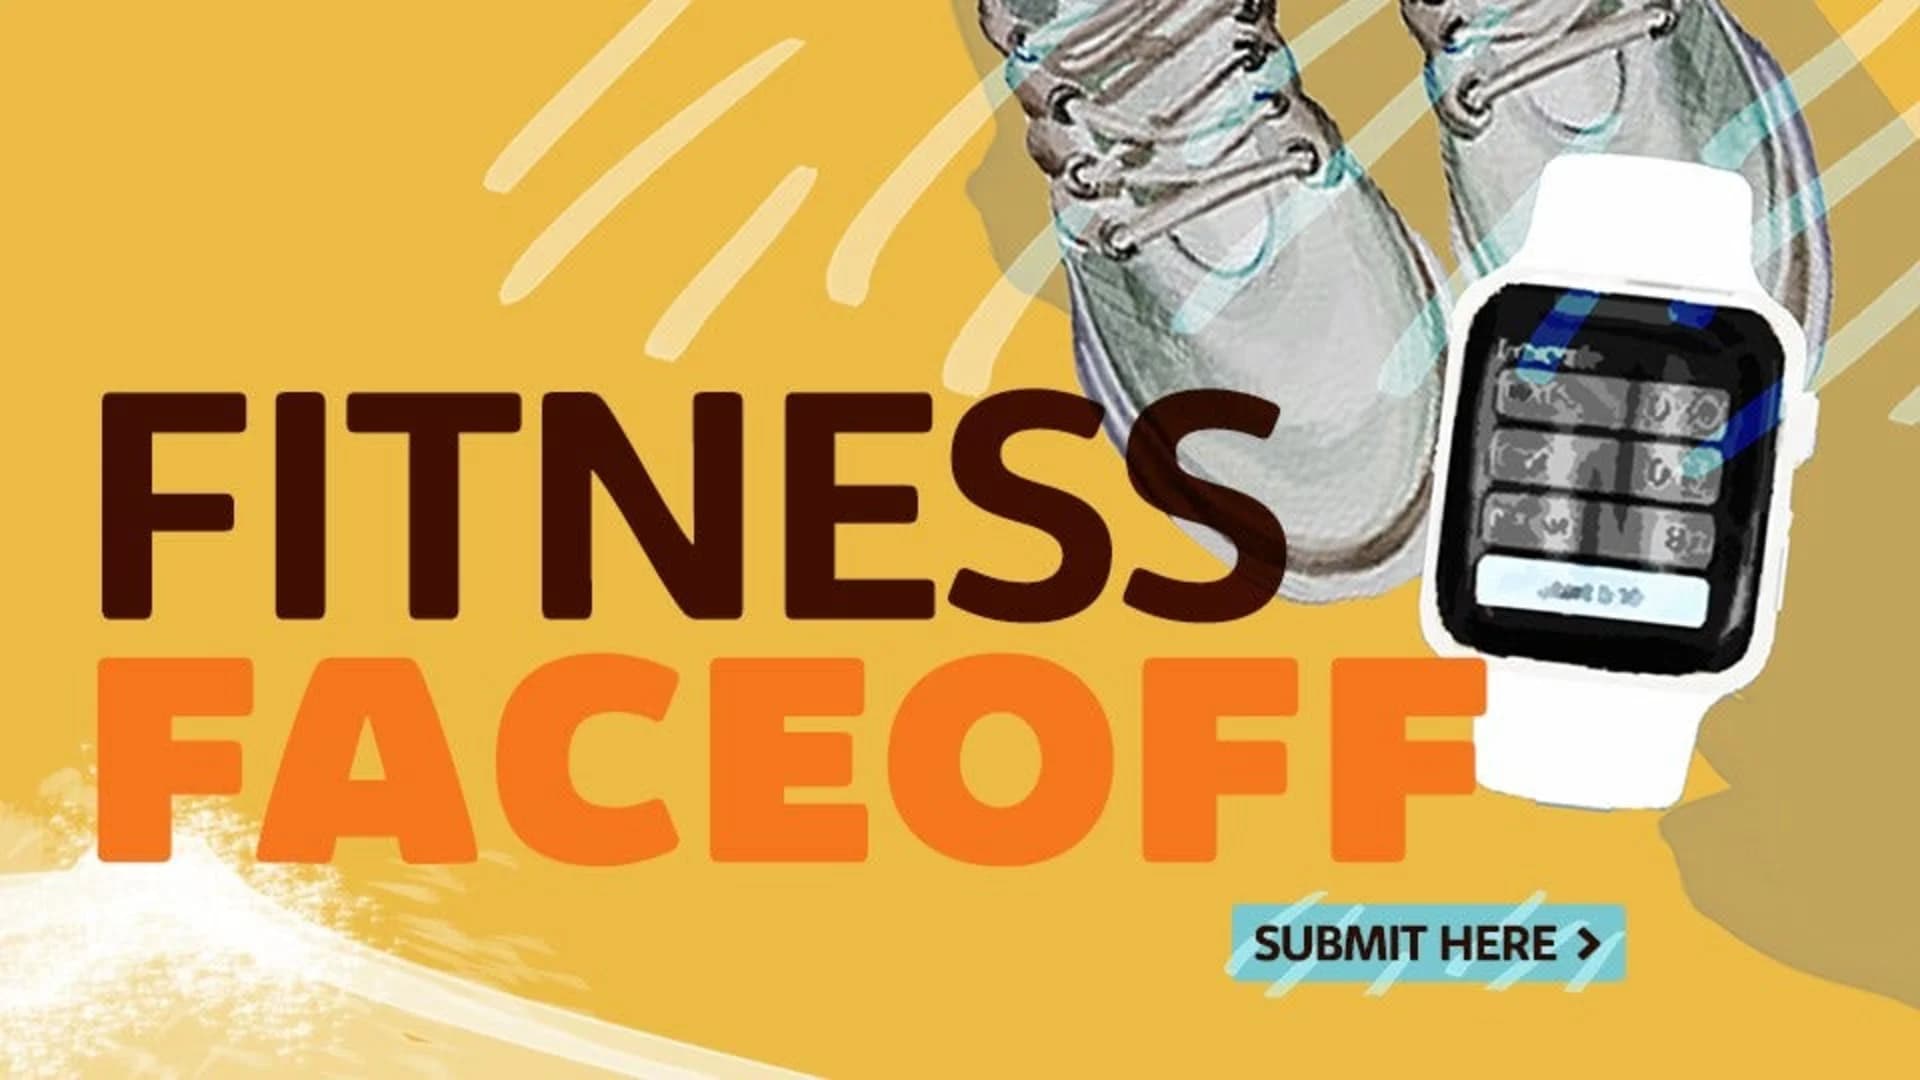 Fitness Face-off crosses the finish line in The Bronx